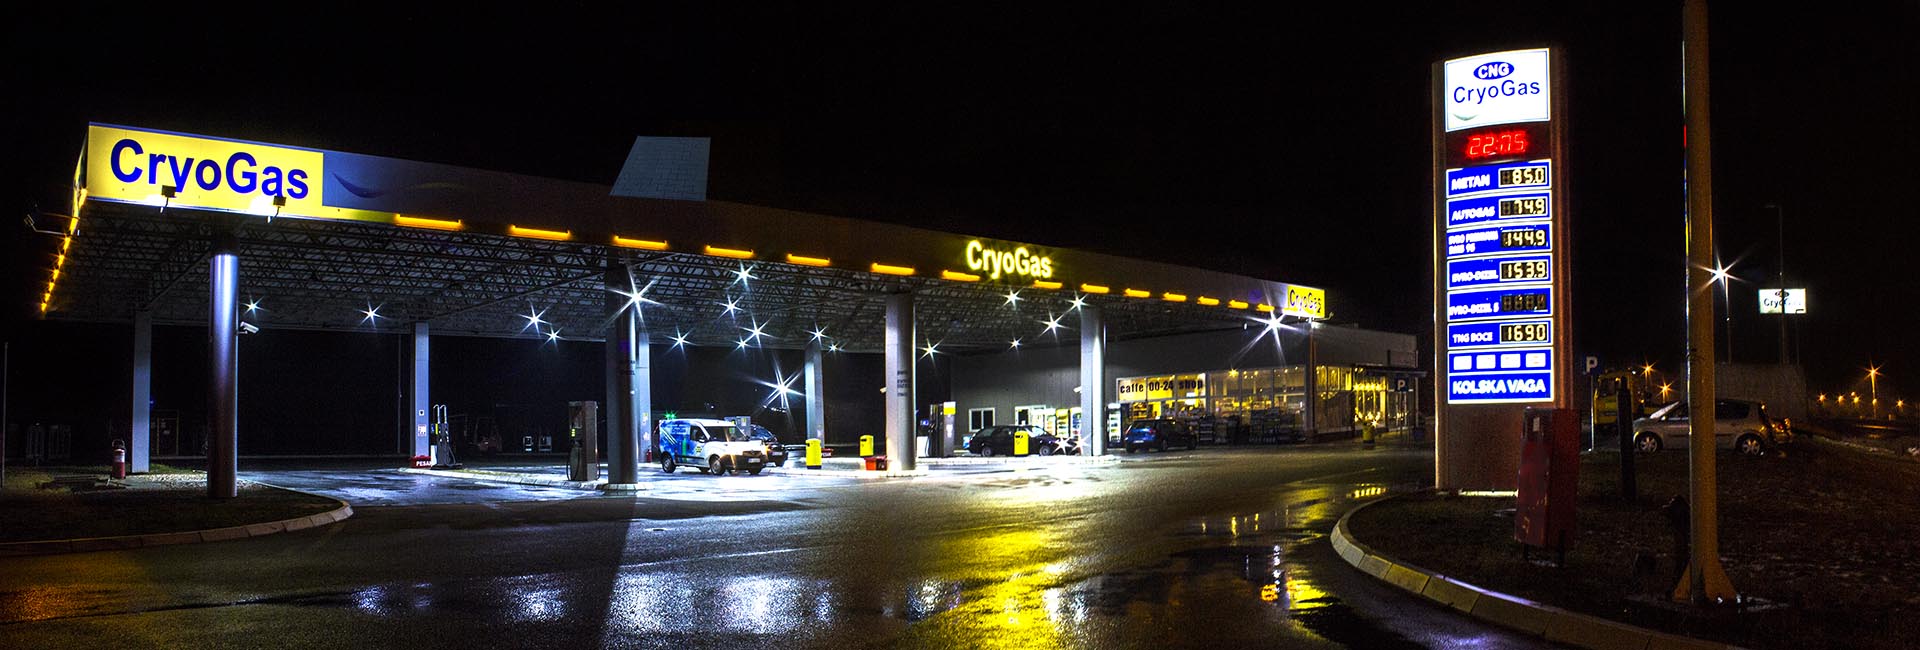 cng methane station | CryoGas